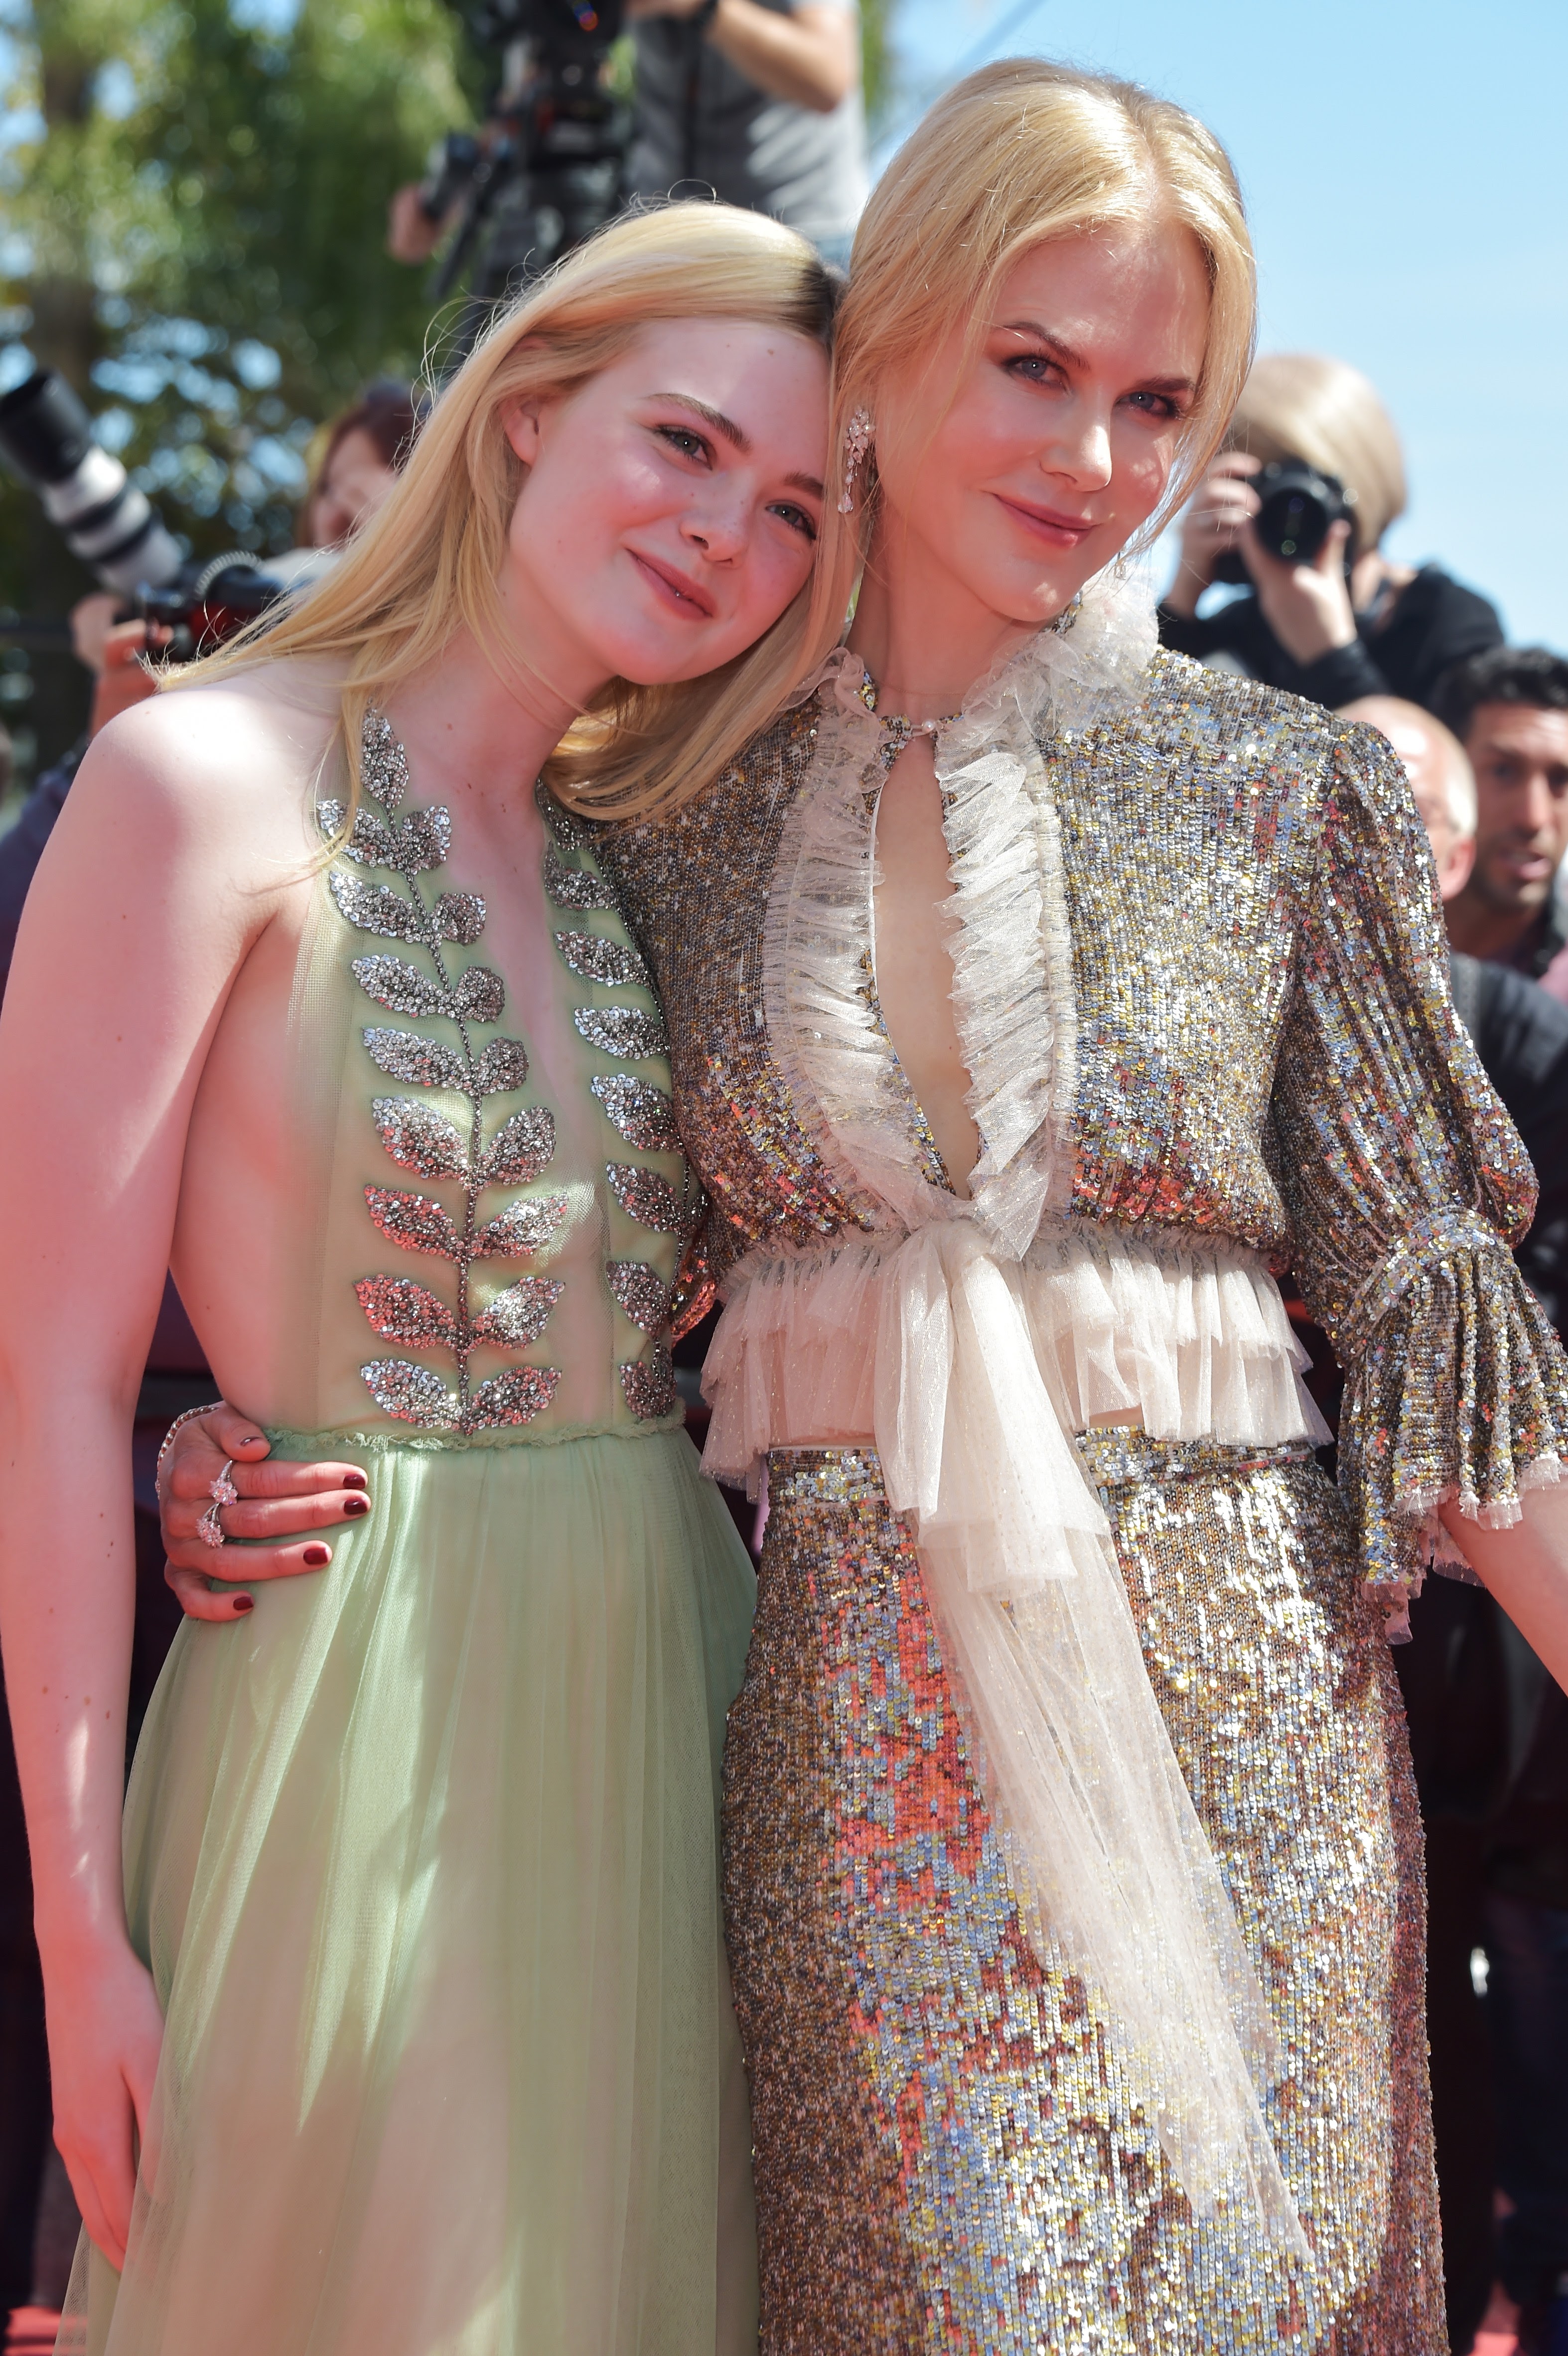 Elle Fanning Nicole Kidman On The Red Carpet Of How To Talk To Girls At Parties 第70回カンヌ映画祭のsf青春 パンク ロック映画 ハウ トゥ トーク トゥ ガールズ アット パーティーズ のプレミア上映のエルたんとニコール キッドマン Cia